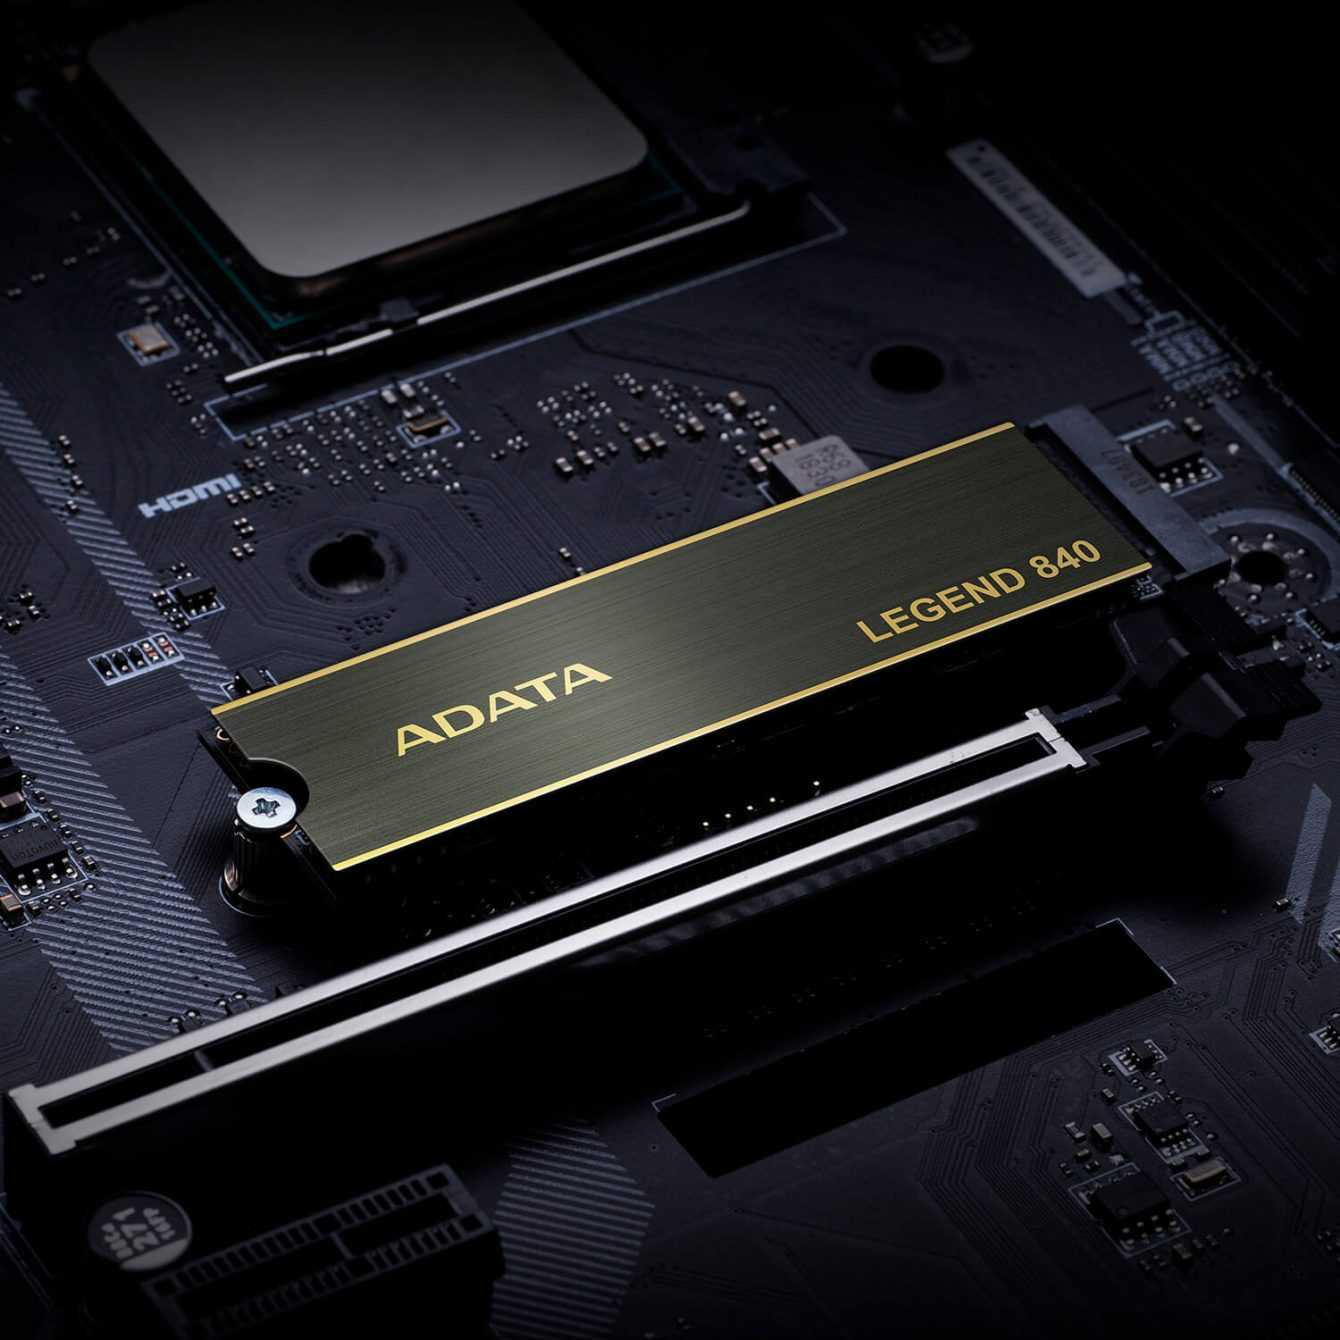 ADATA: presented the new SSD LEGEND 850 and 710 born for software design